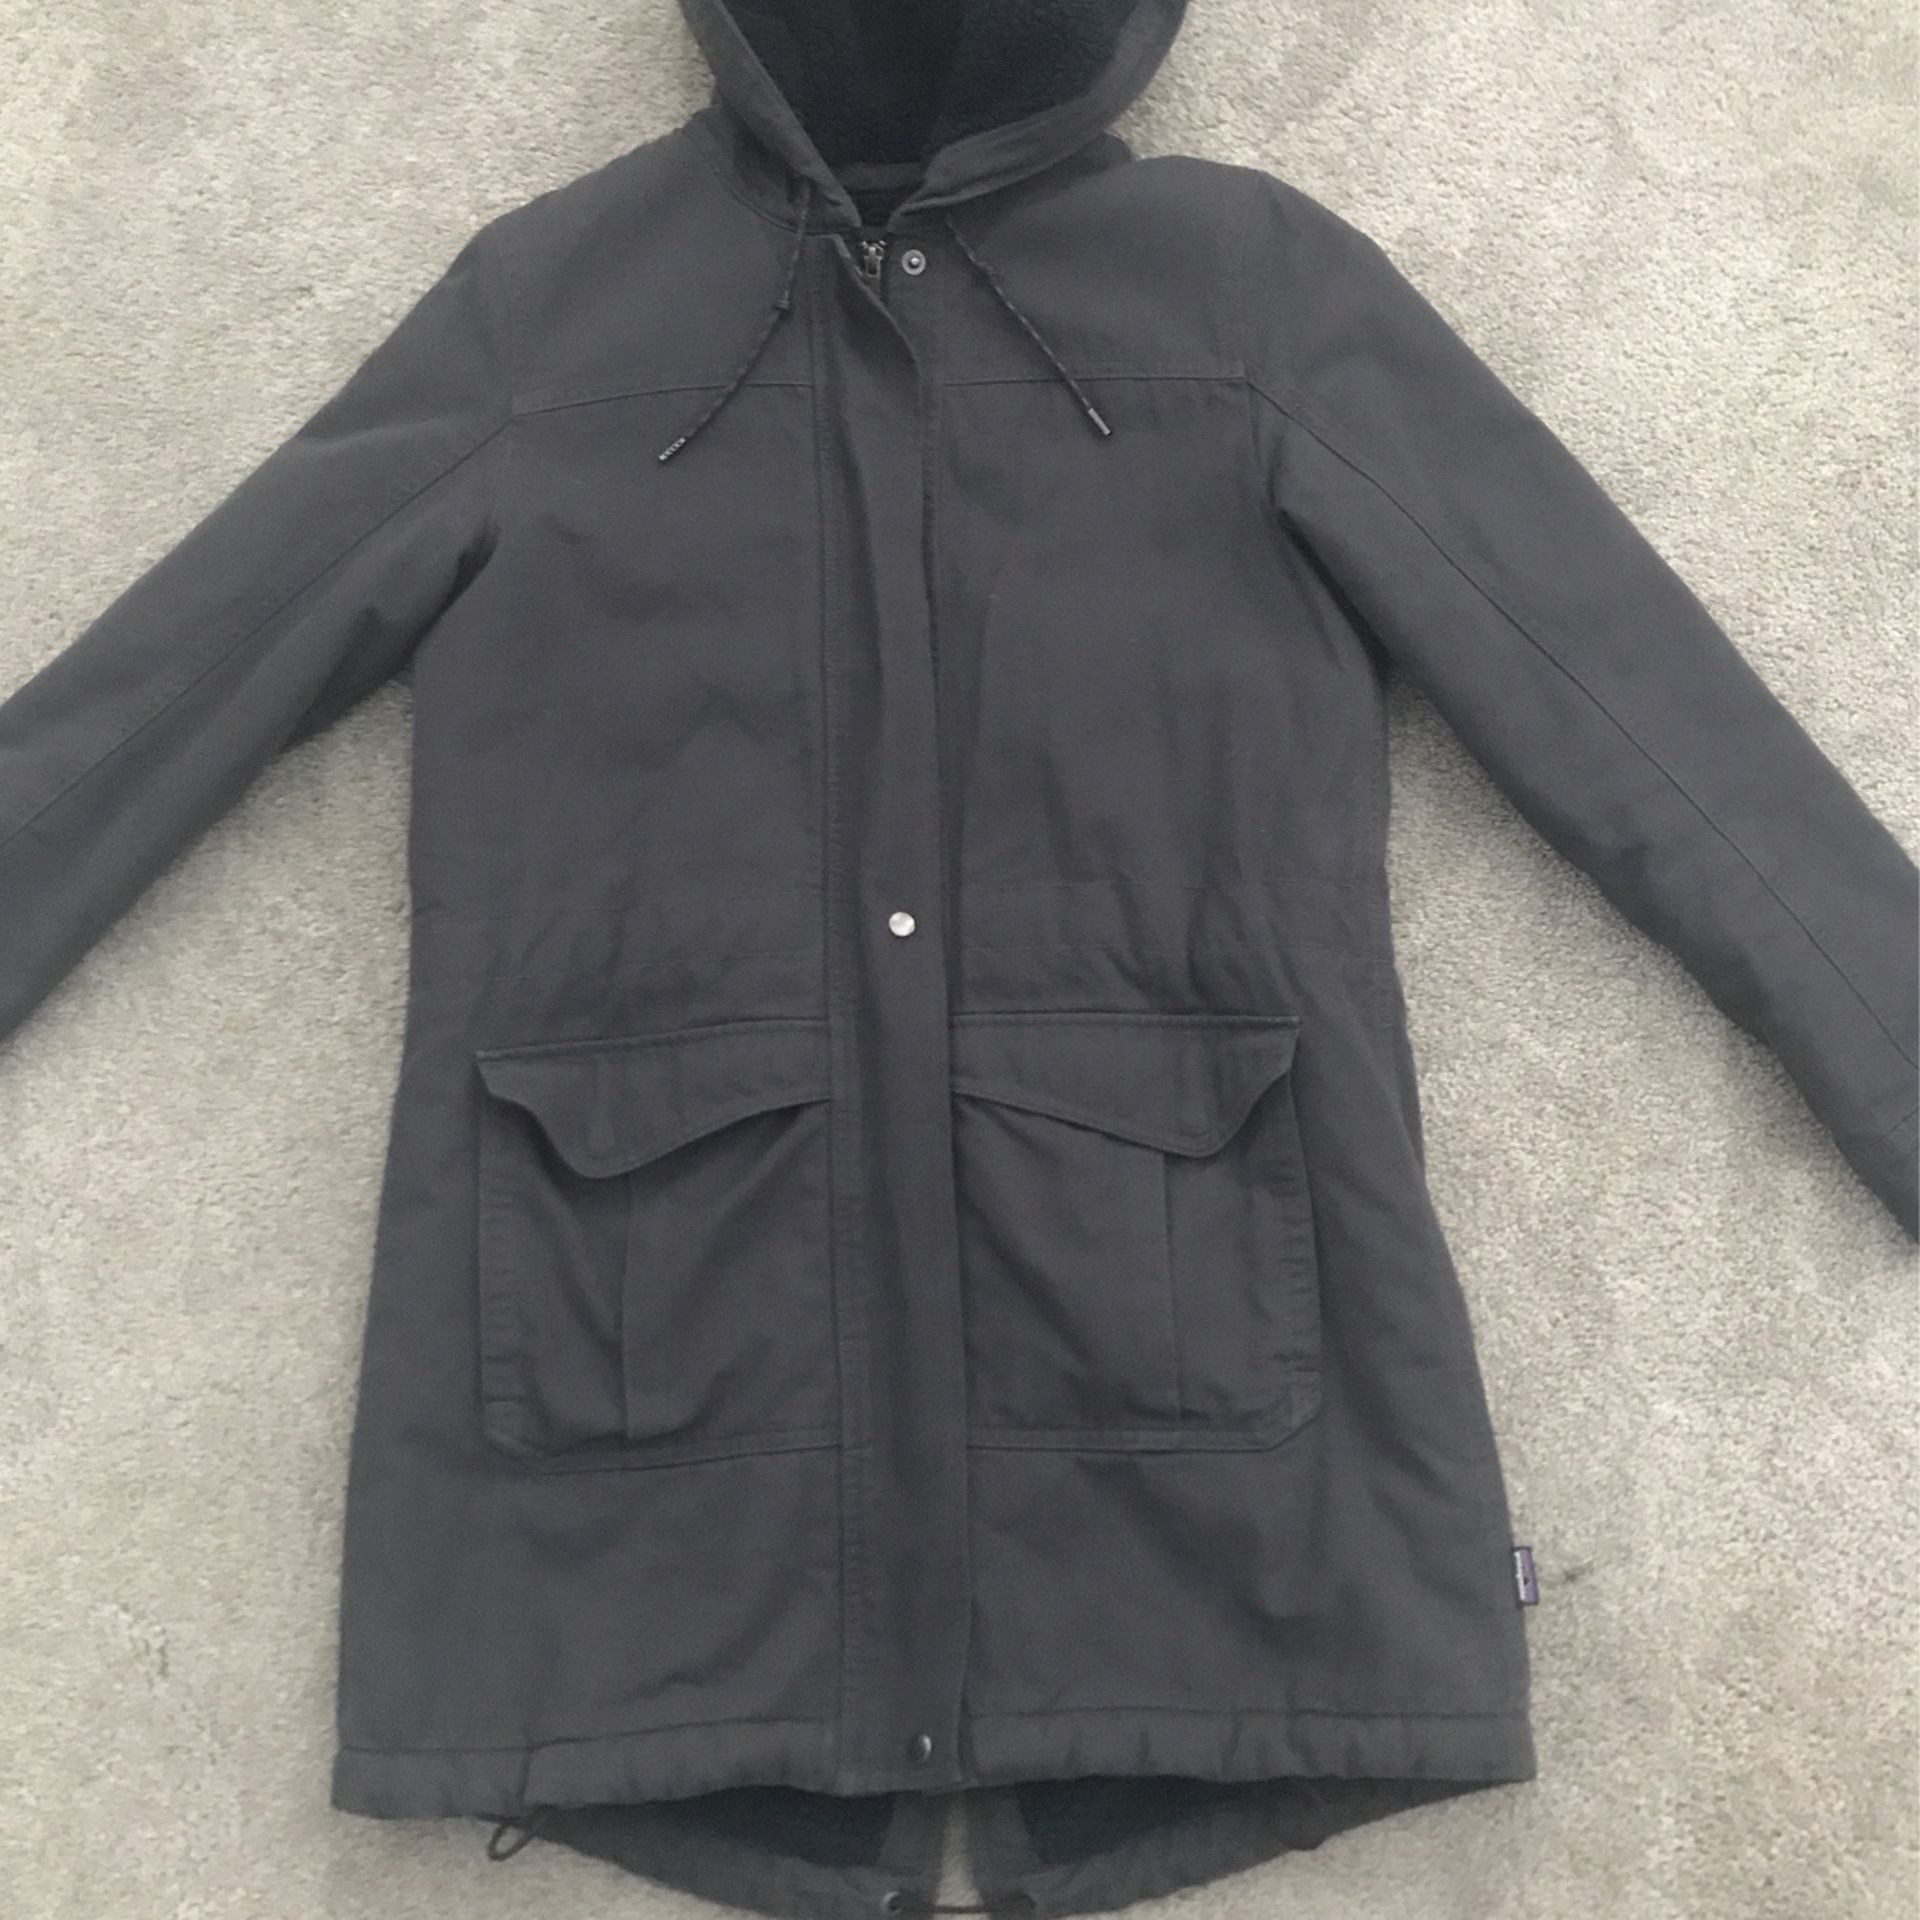 Patagonia Coat (Women’s) size small